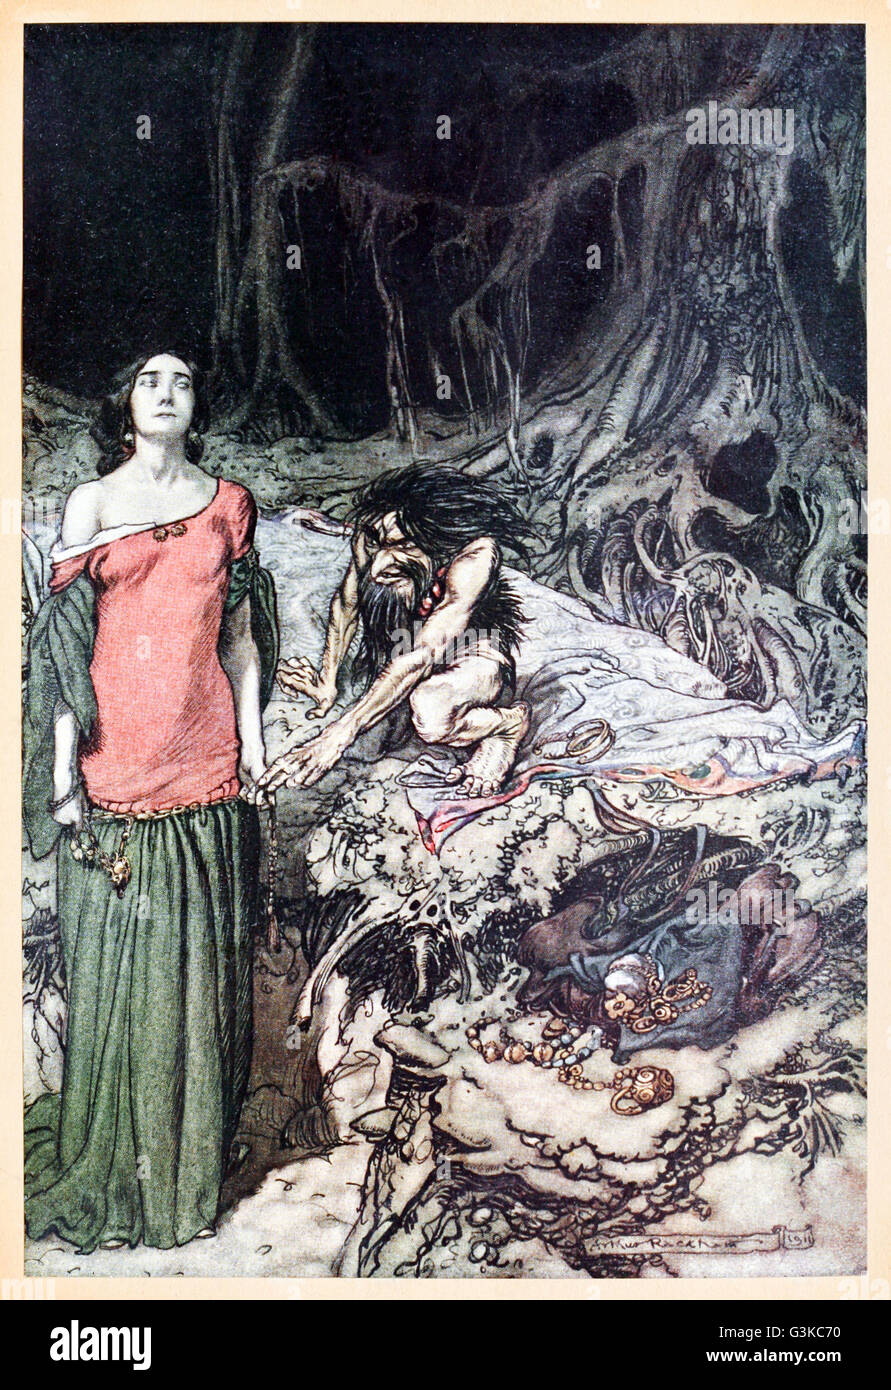 “The wooing of Grimhilde, the mother of Hagen” from 'Siegfried & The Twilight of the Gods' illustrated by Arthur Rackham (1867-1939). See description for more information. Stock Photo